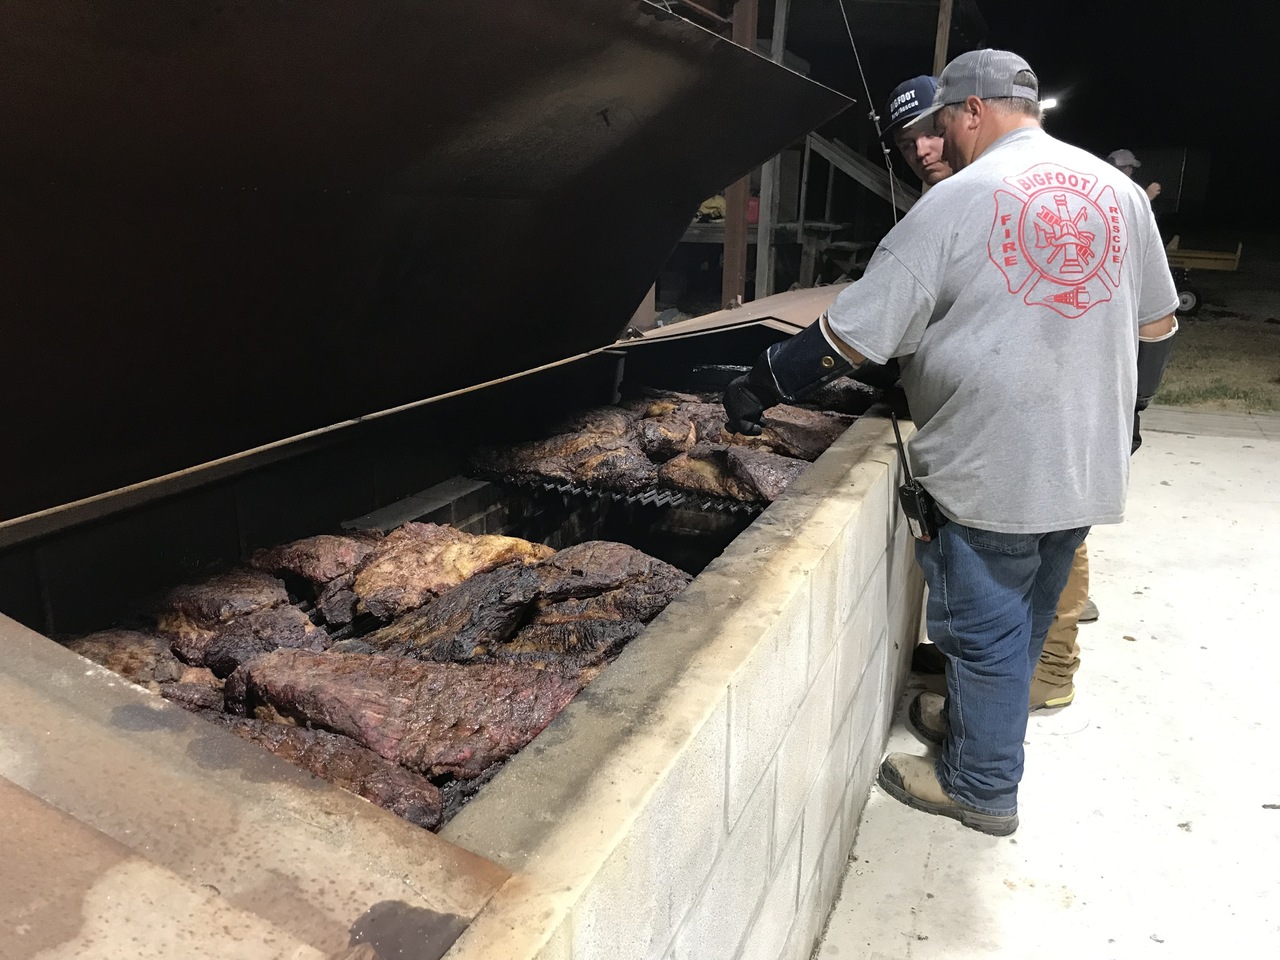 Two of our VFD chefs working briskets on  the barbecue pit.